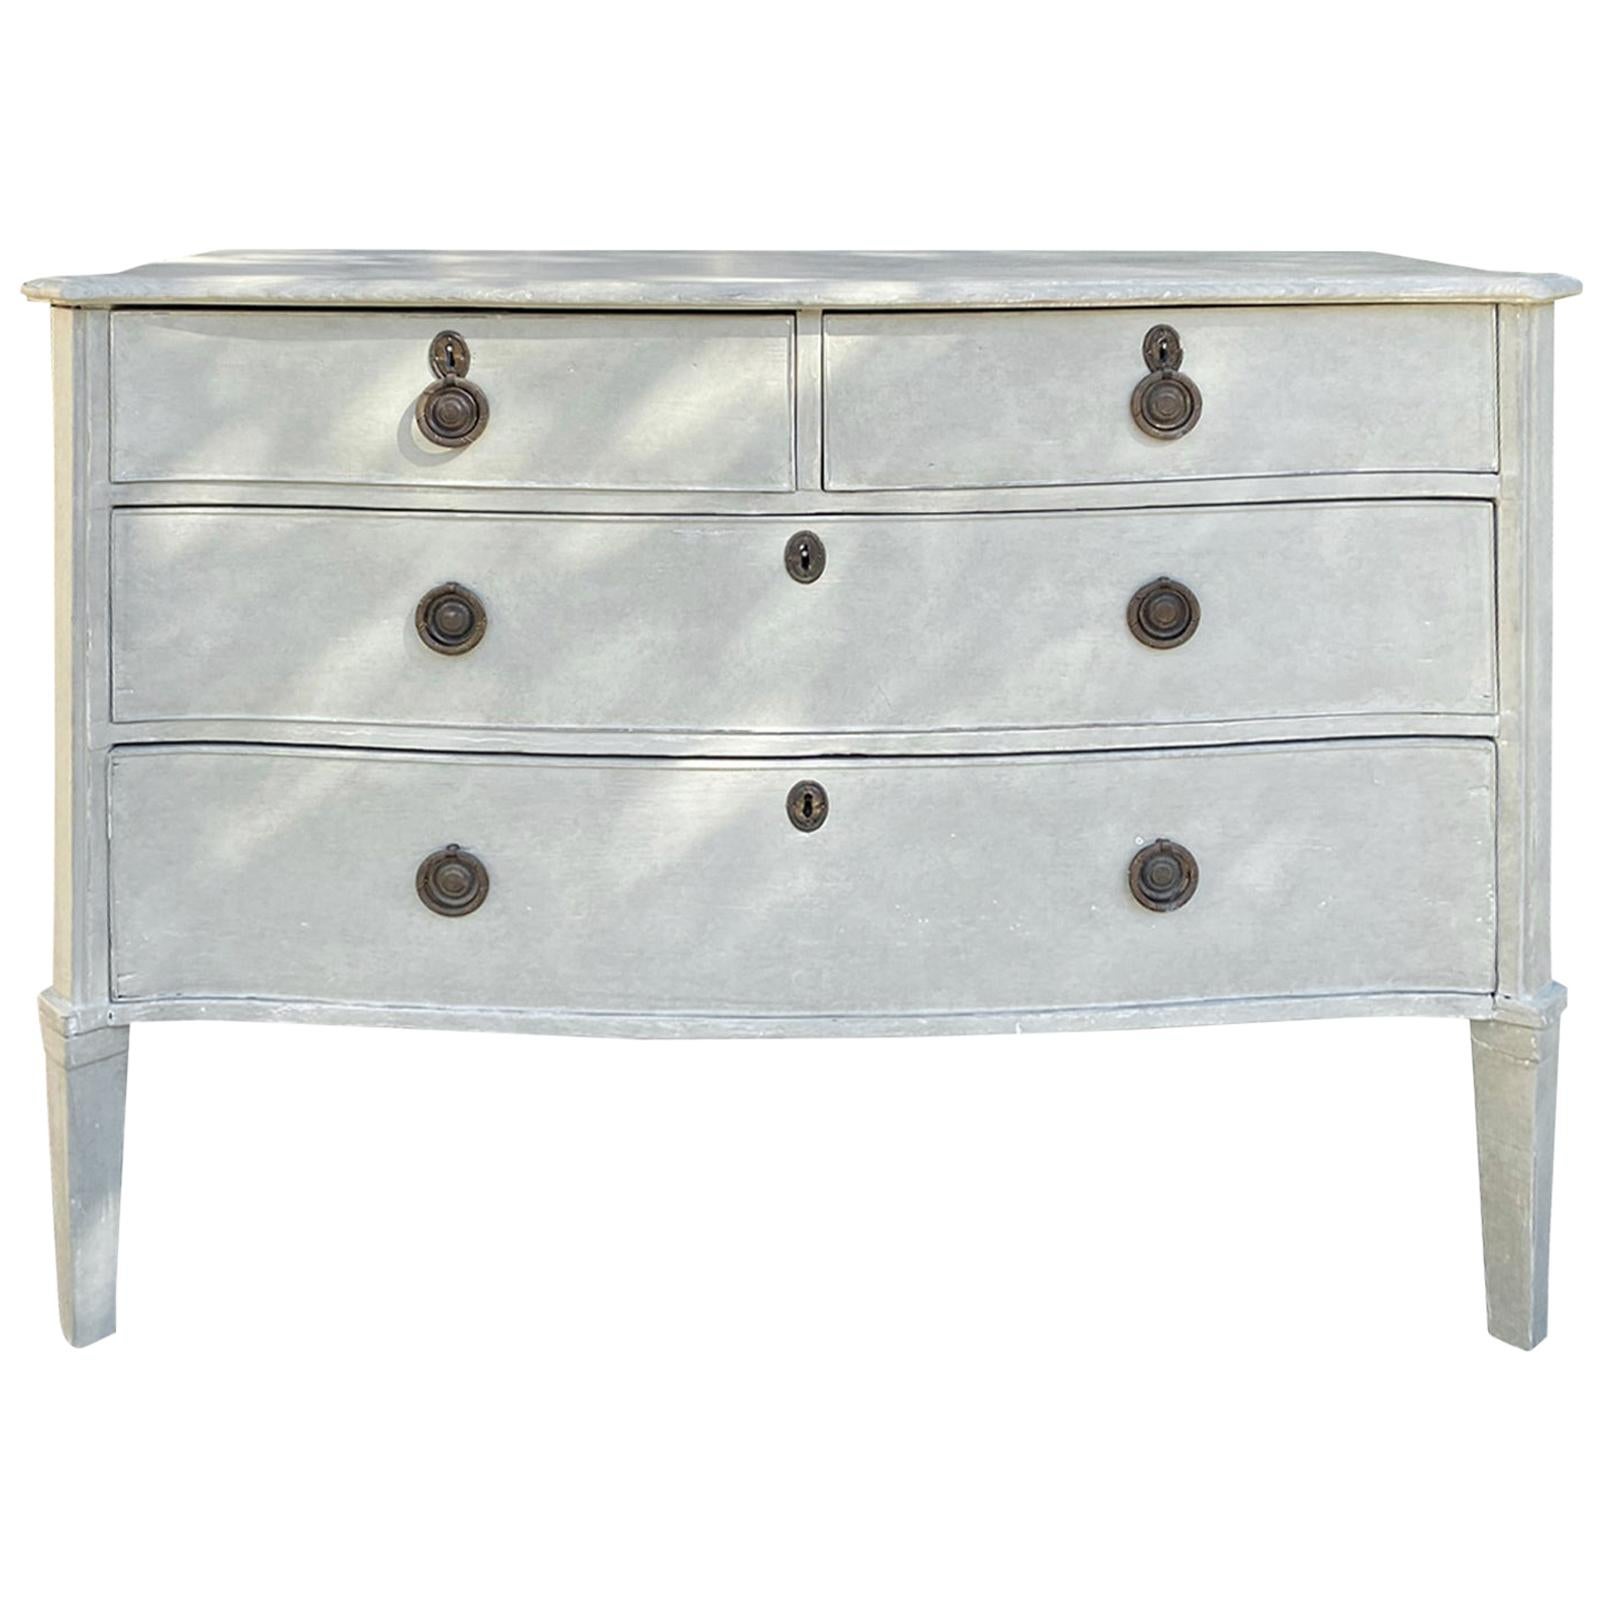 19th-Early 20th Century Italian Four-Drawer Commode with Custom Painted Finish